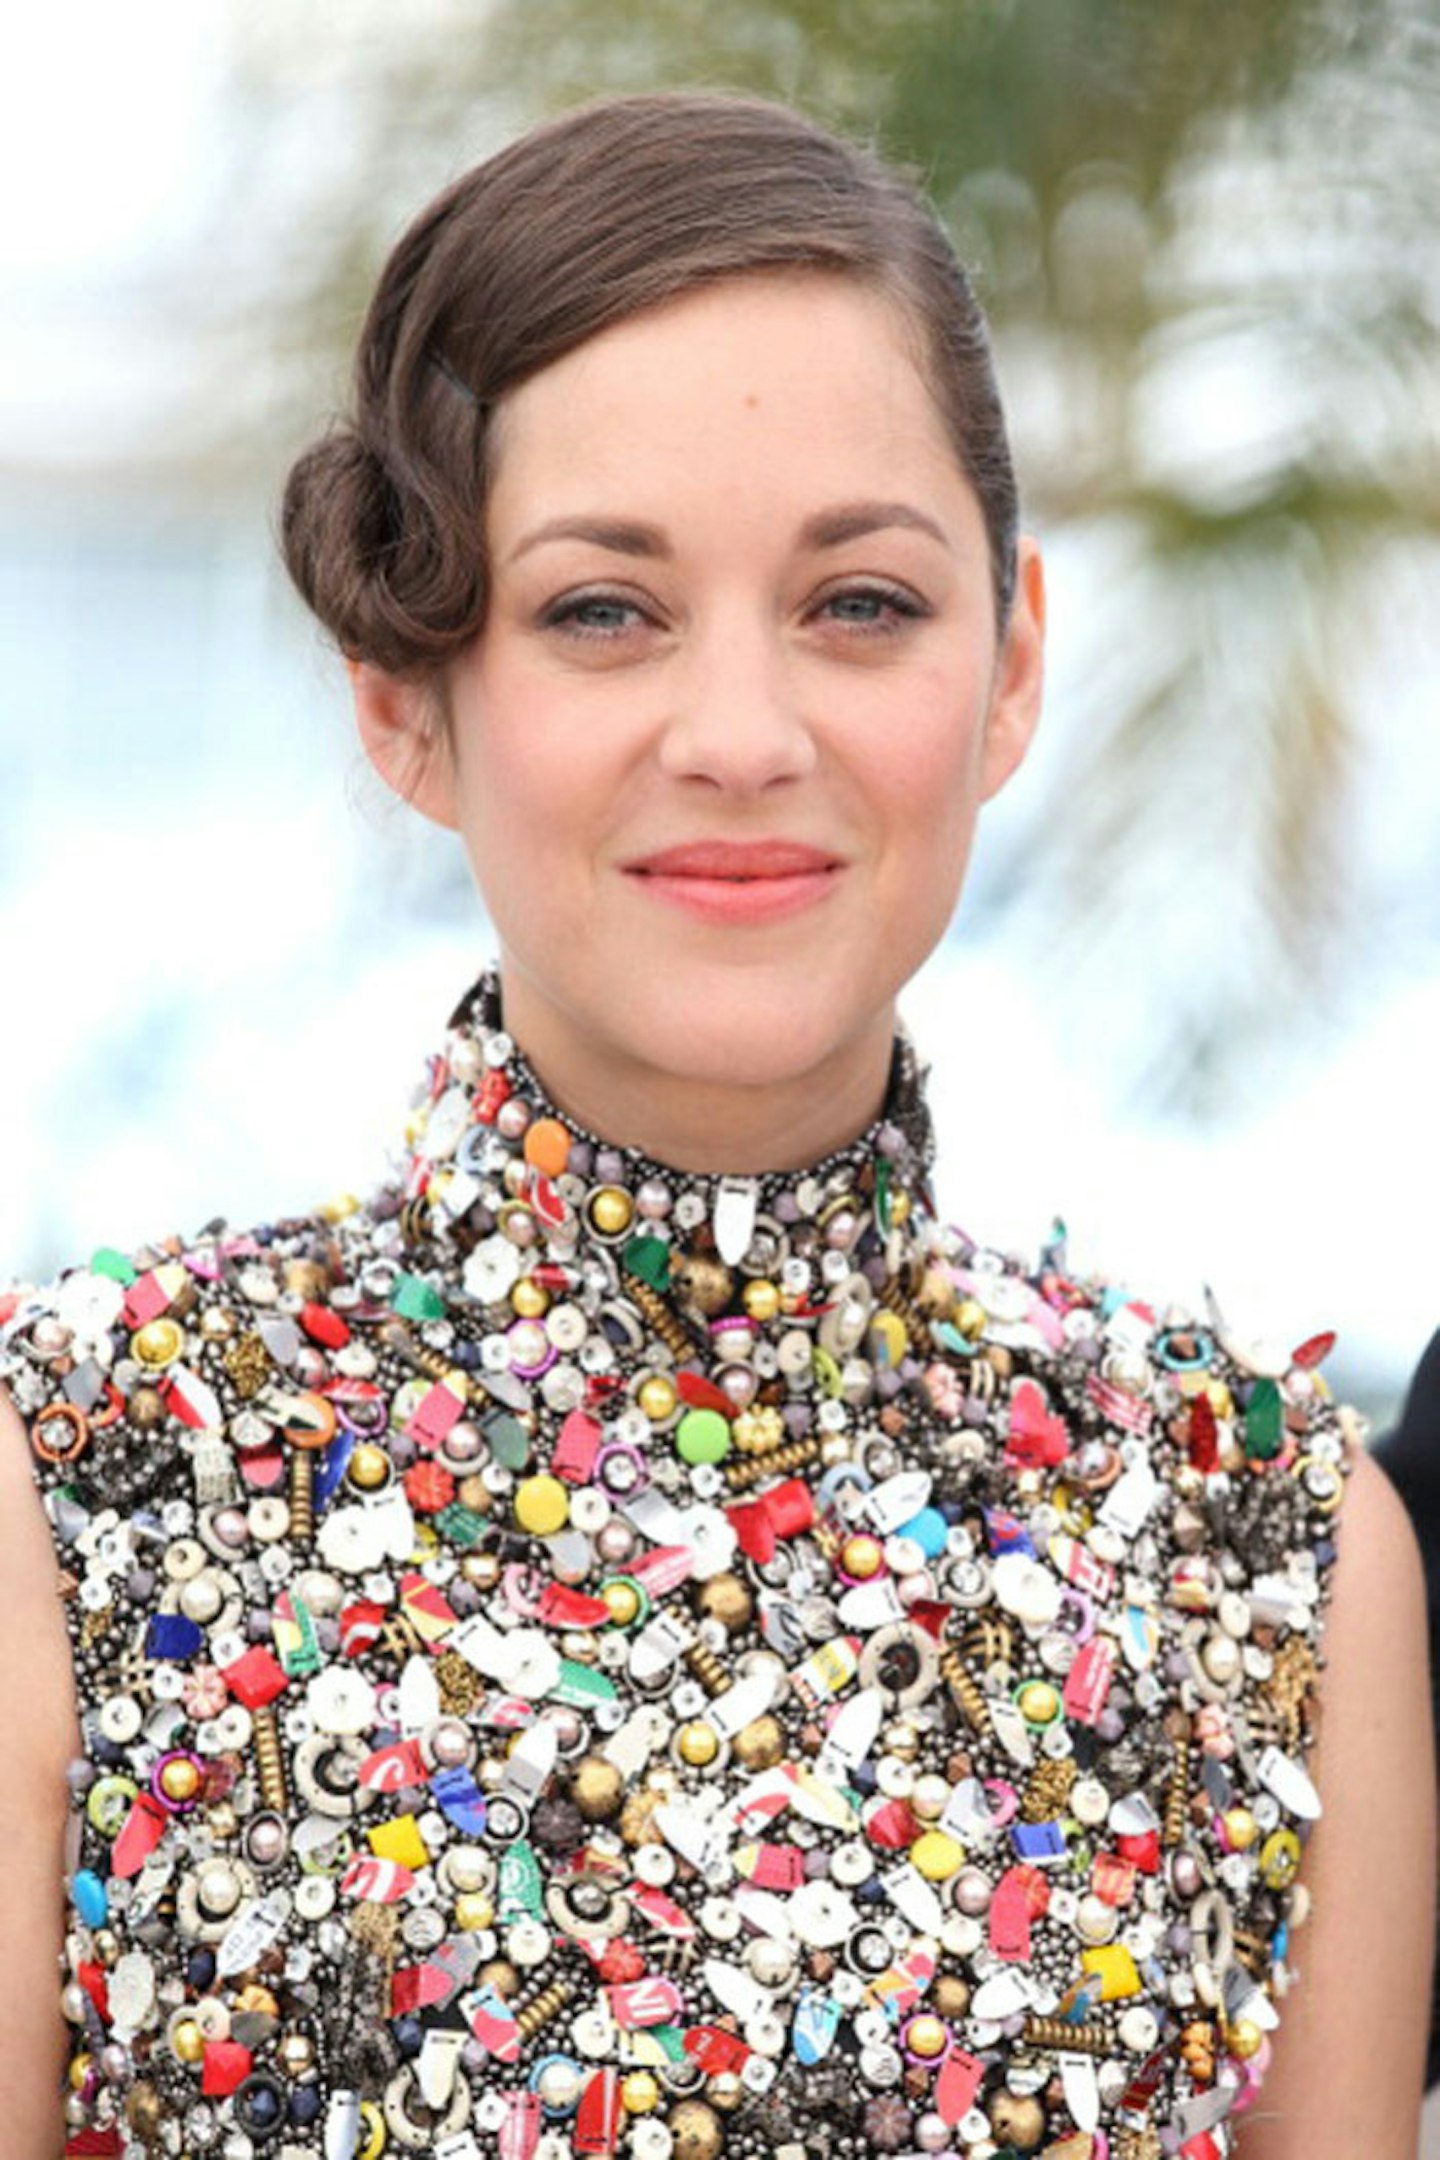 Add interest with an intricate chignon at the side like Marion Cotillard